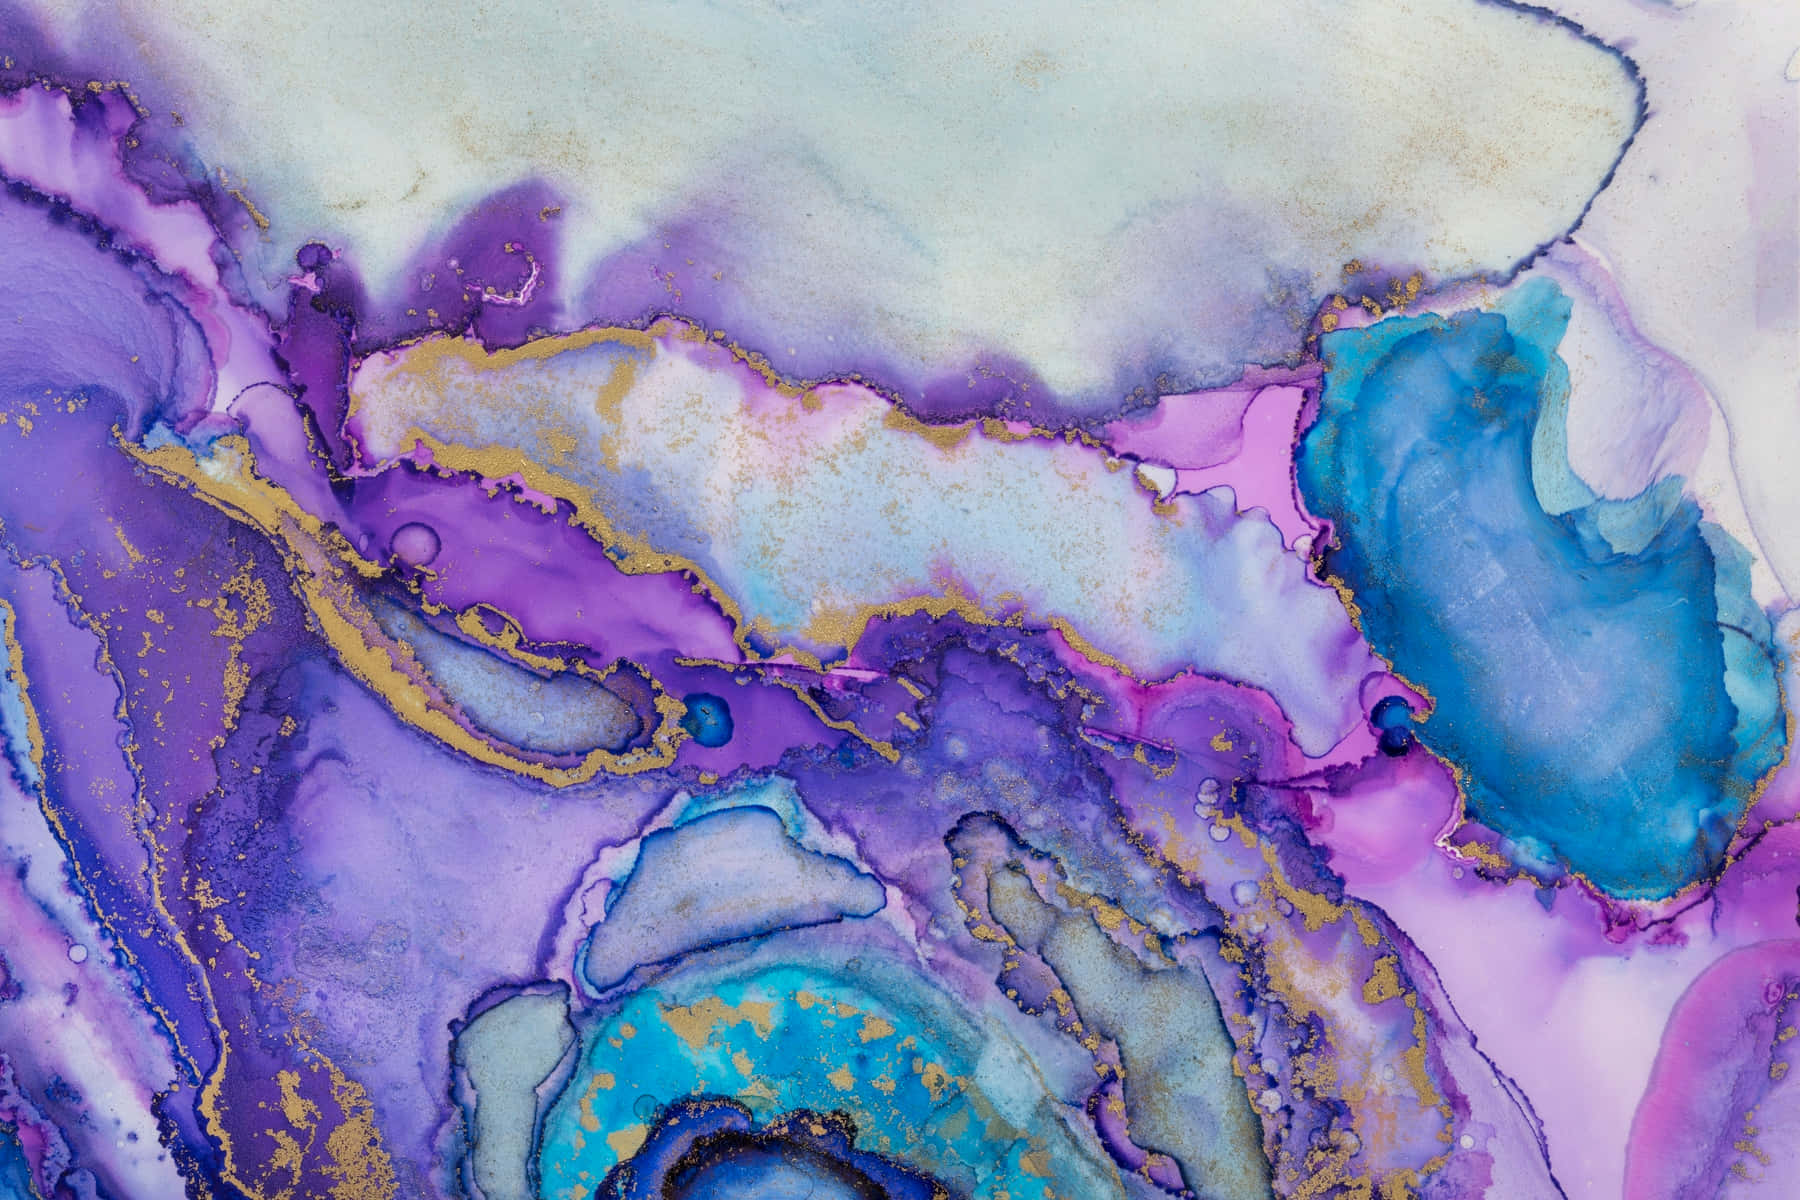 A Painting With Purple, Blue And Gold Colors